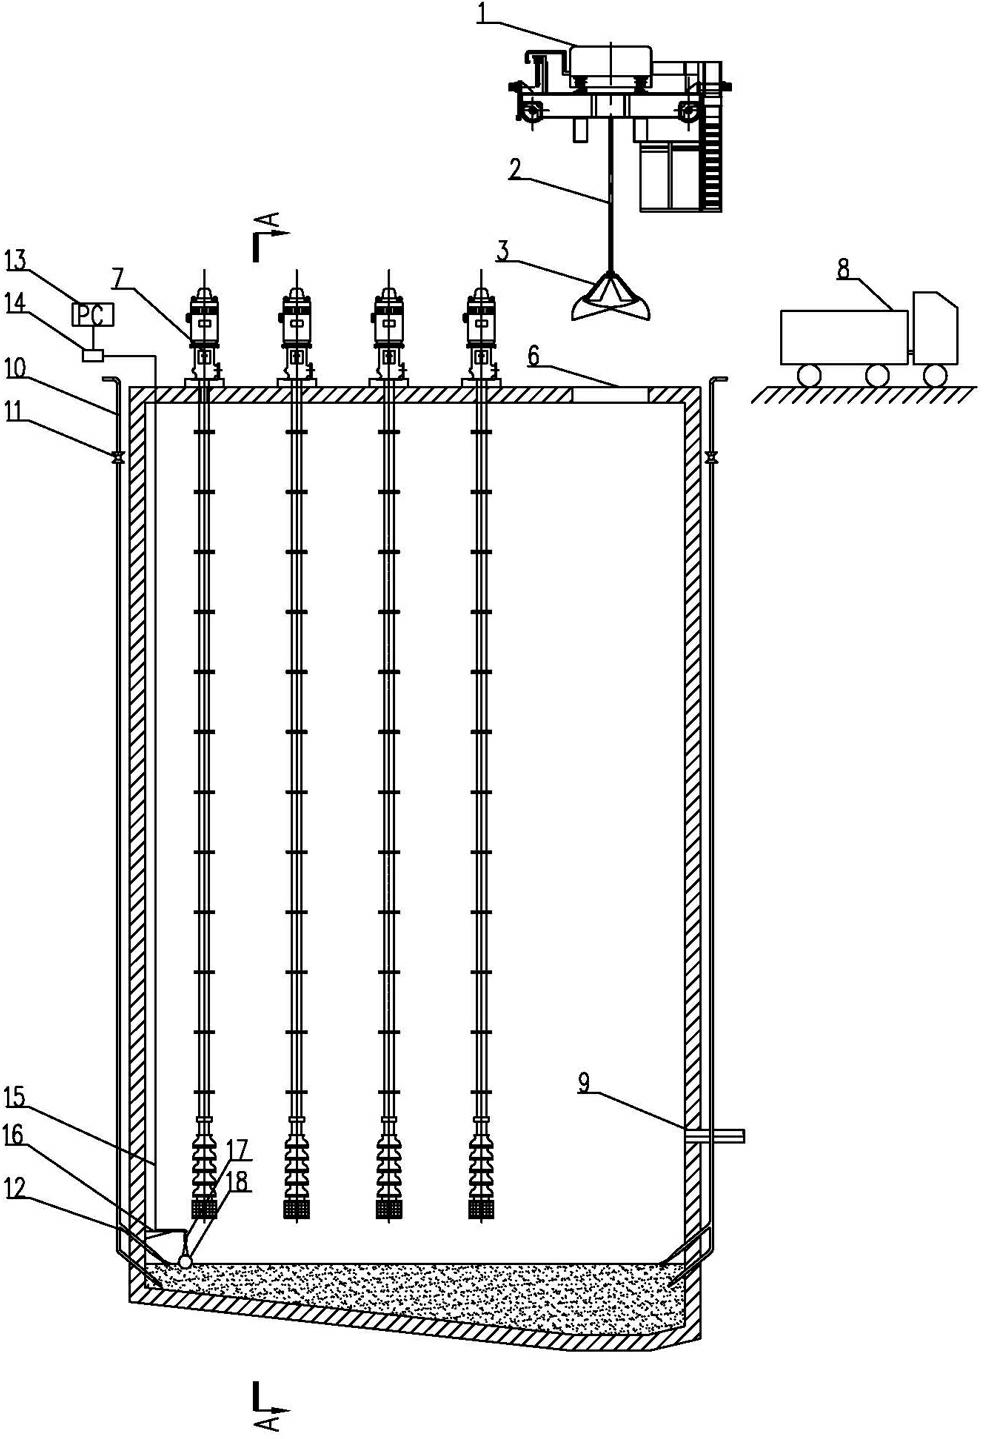 Sump dredging system and mode